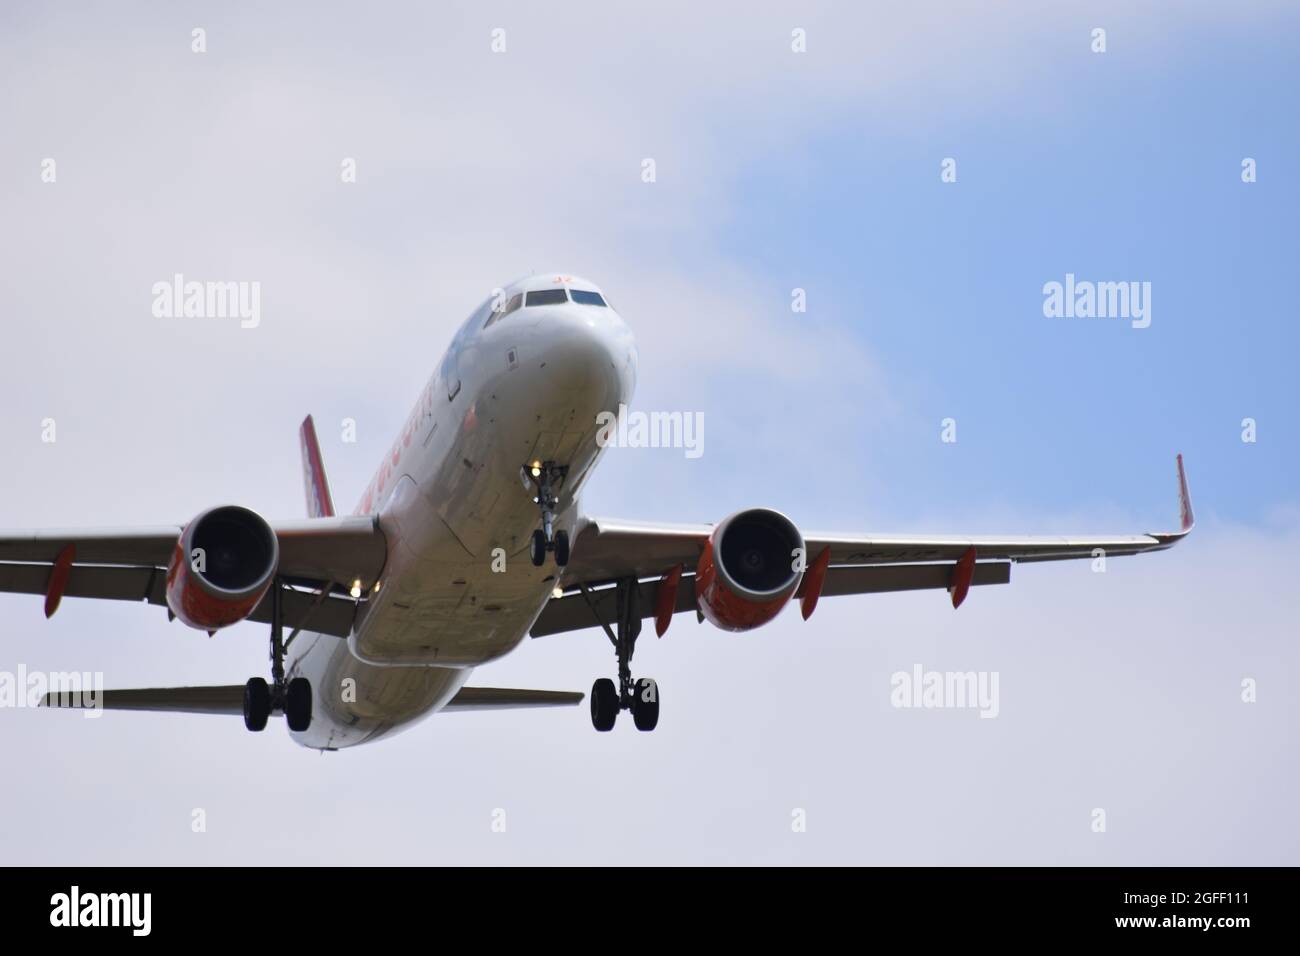 An easyJet passenger aeroplane coming into land at Lulsgate, Bristol Airport, England, Europe, UK on the 26th of July 2018 Stock Photo